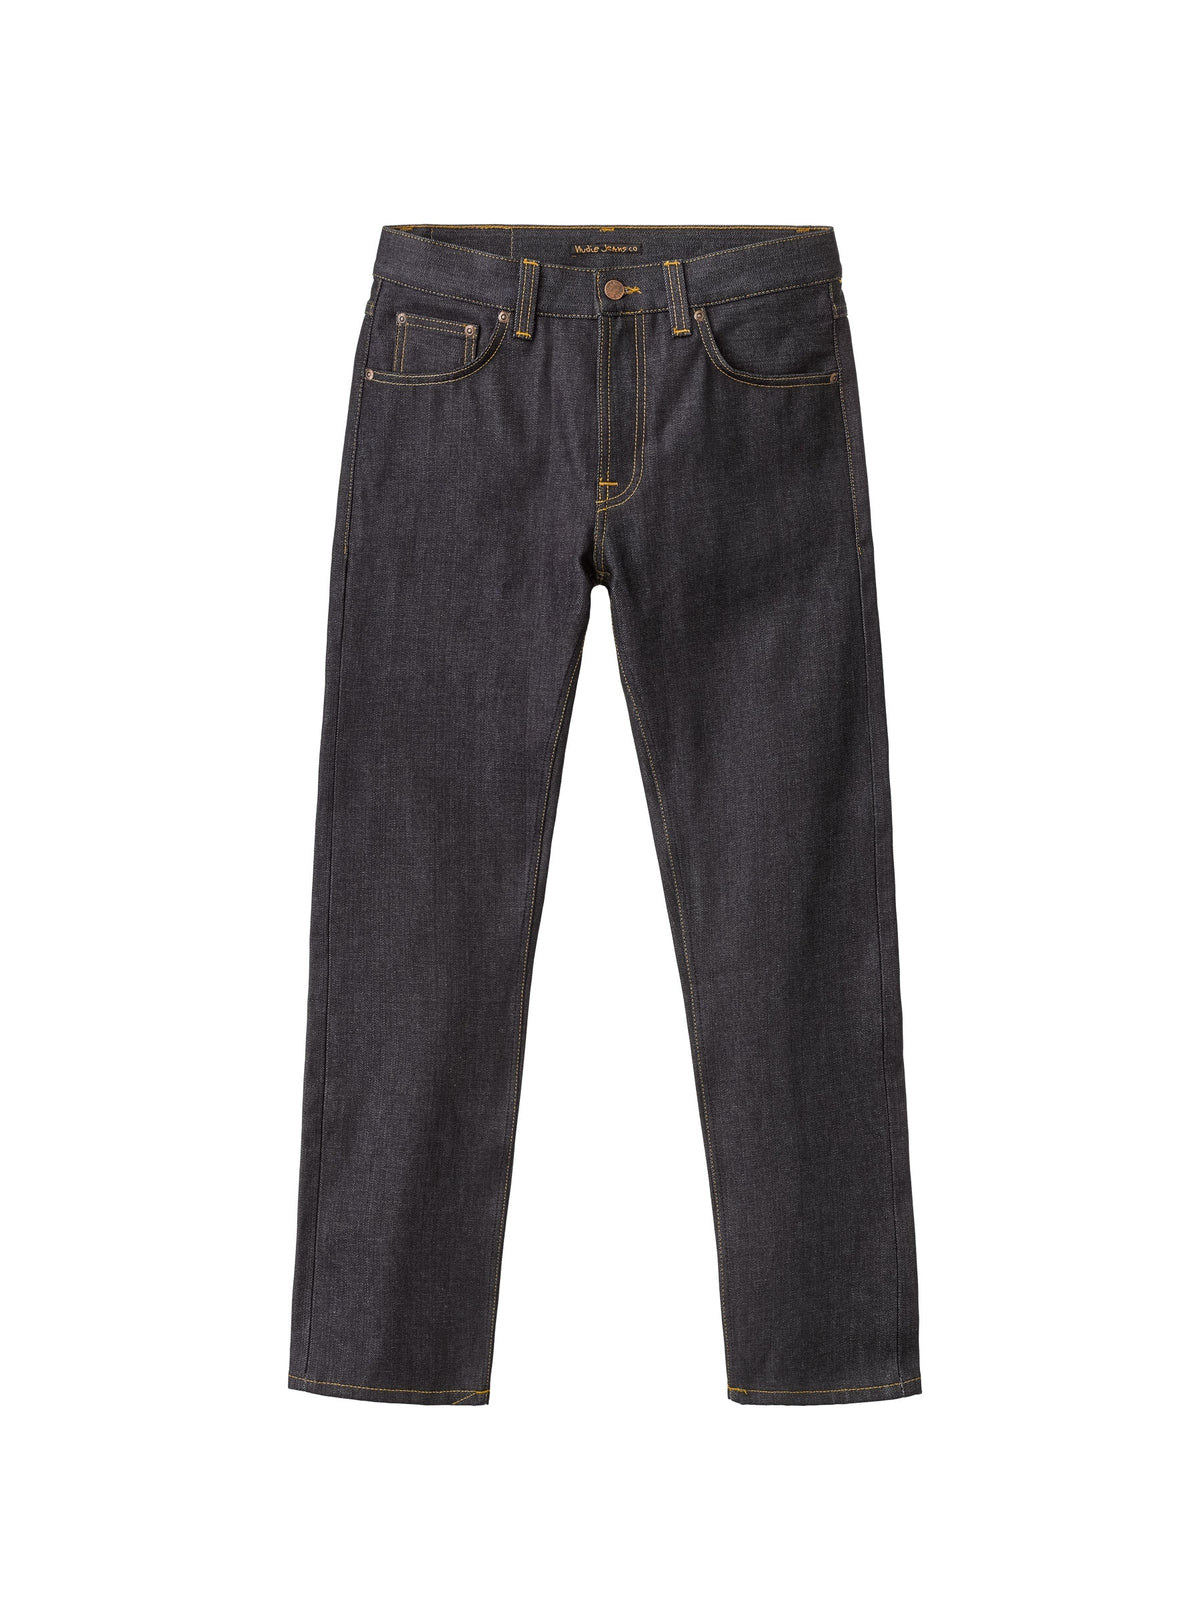 FINAL SALE - Gritty Jackson Dry Classic Navy